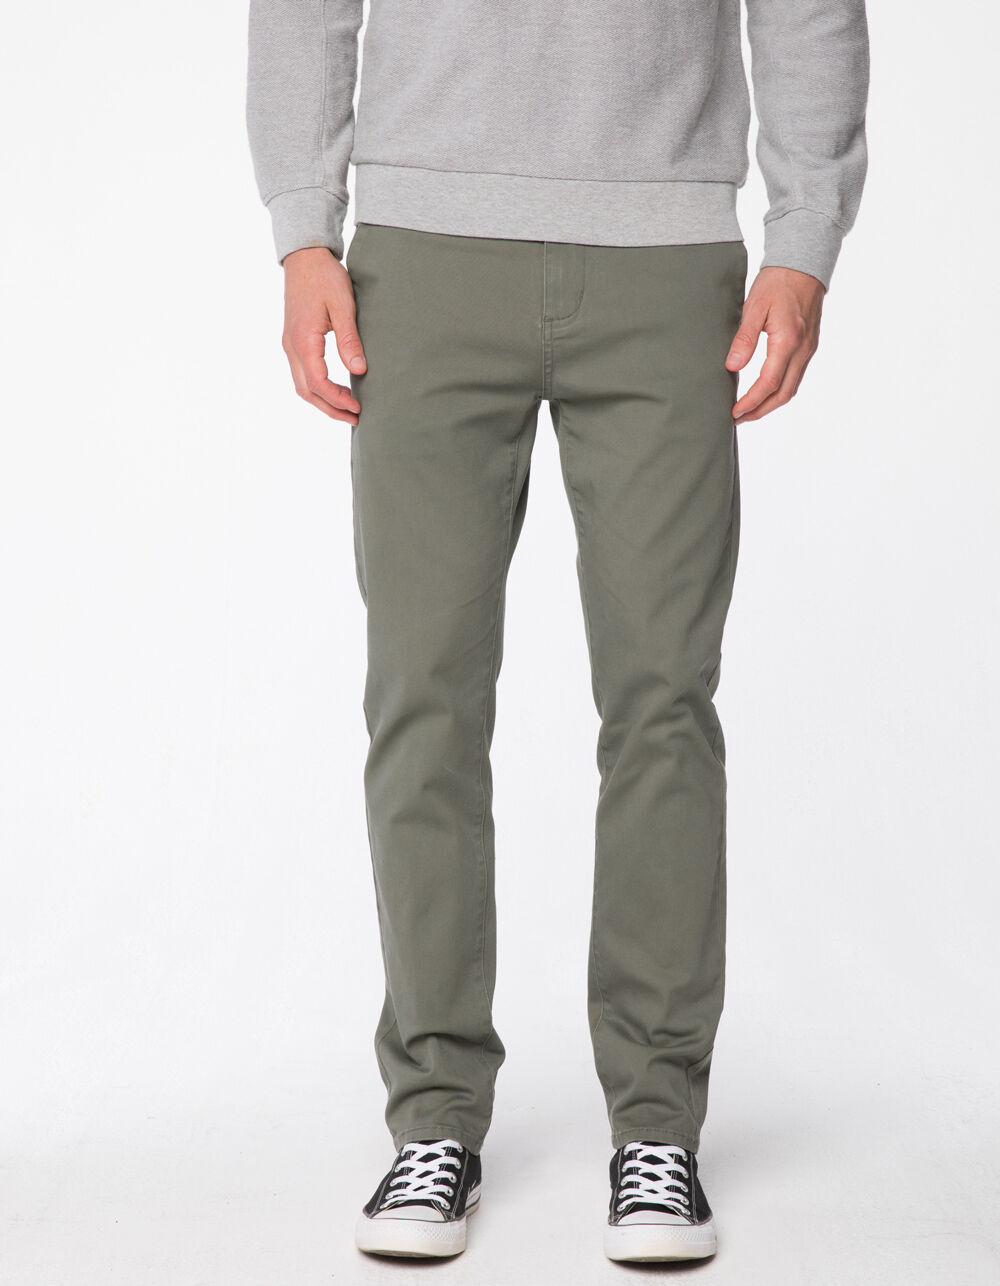 RSQ London Skinny Heather Olive Mens Chino Pants - HEATHER OLIVE | Tillys